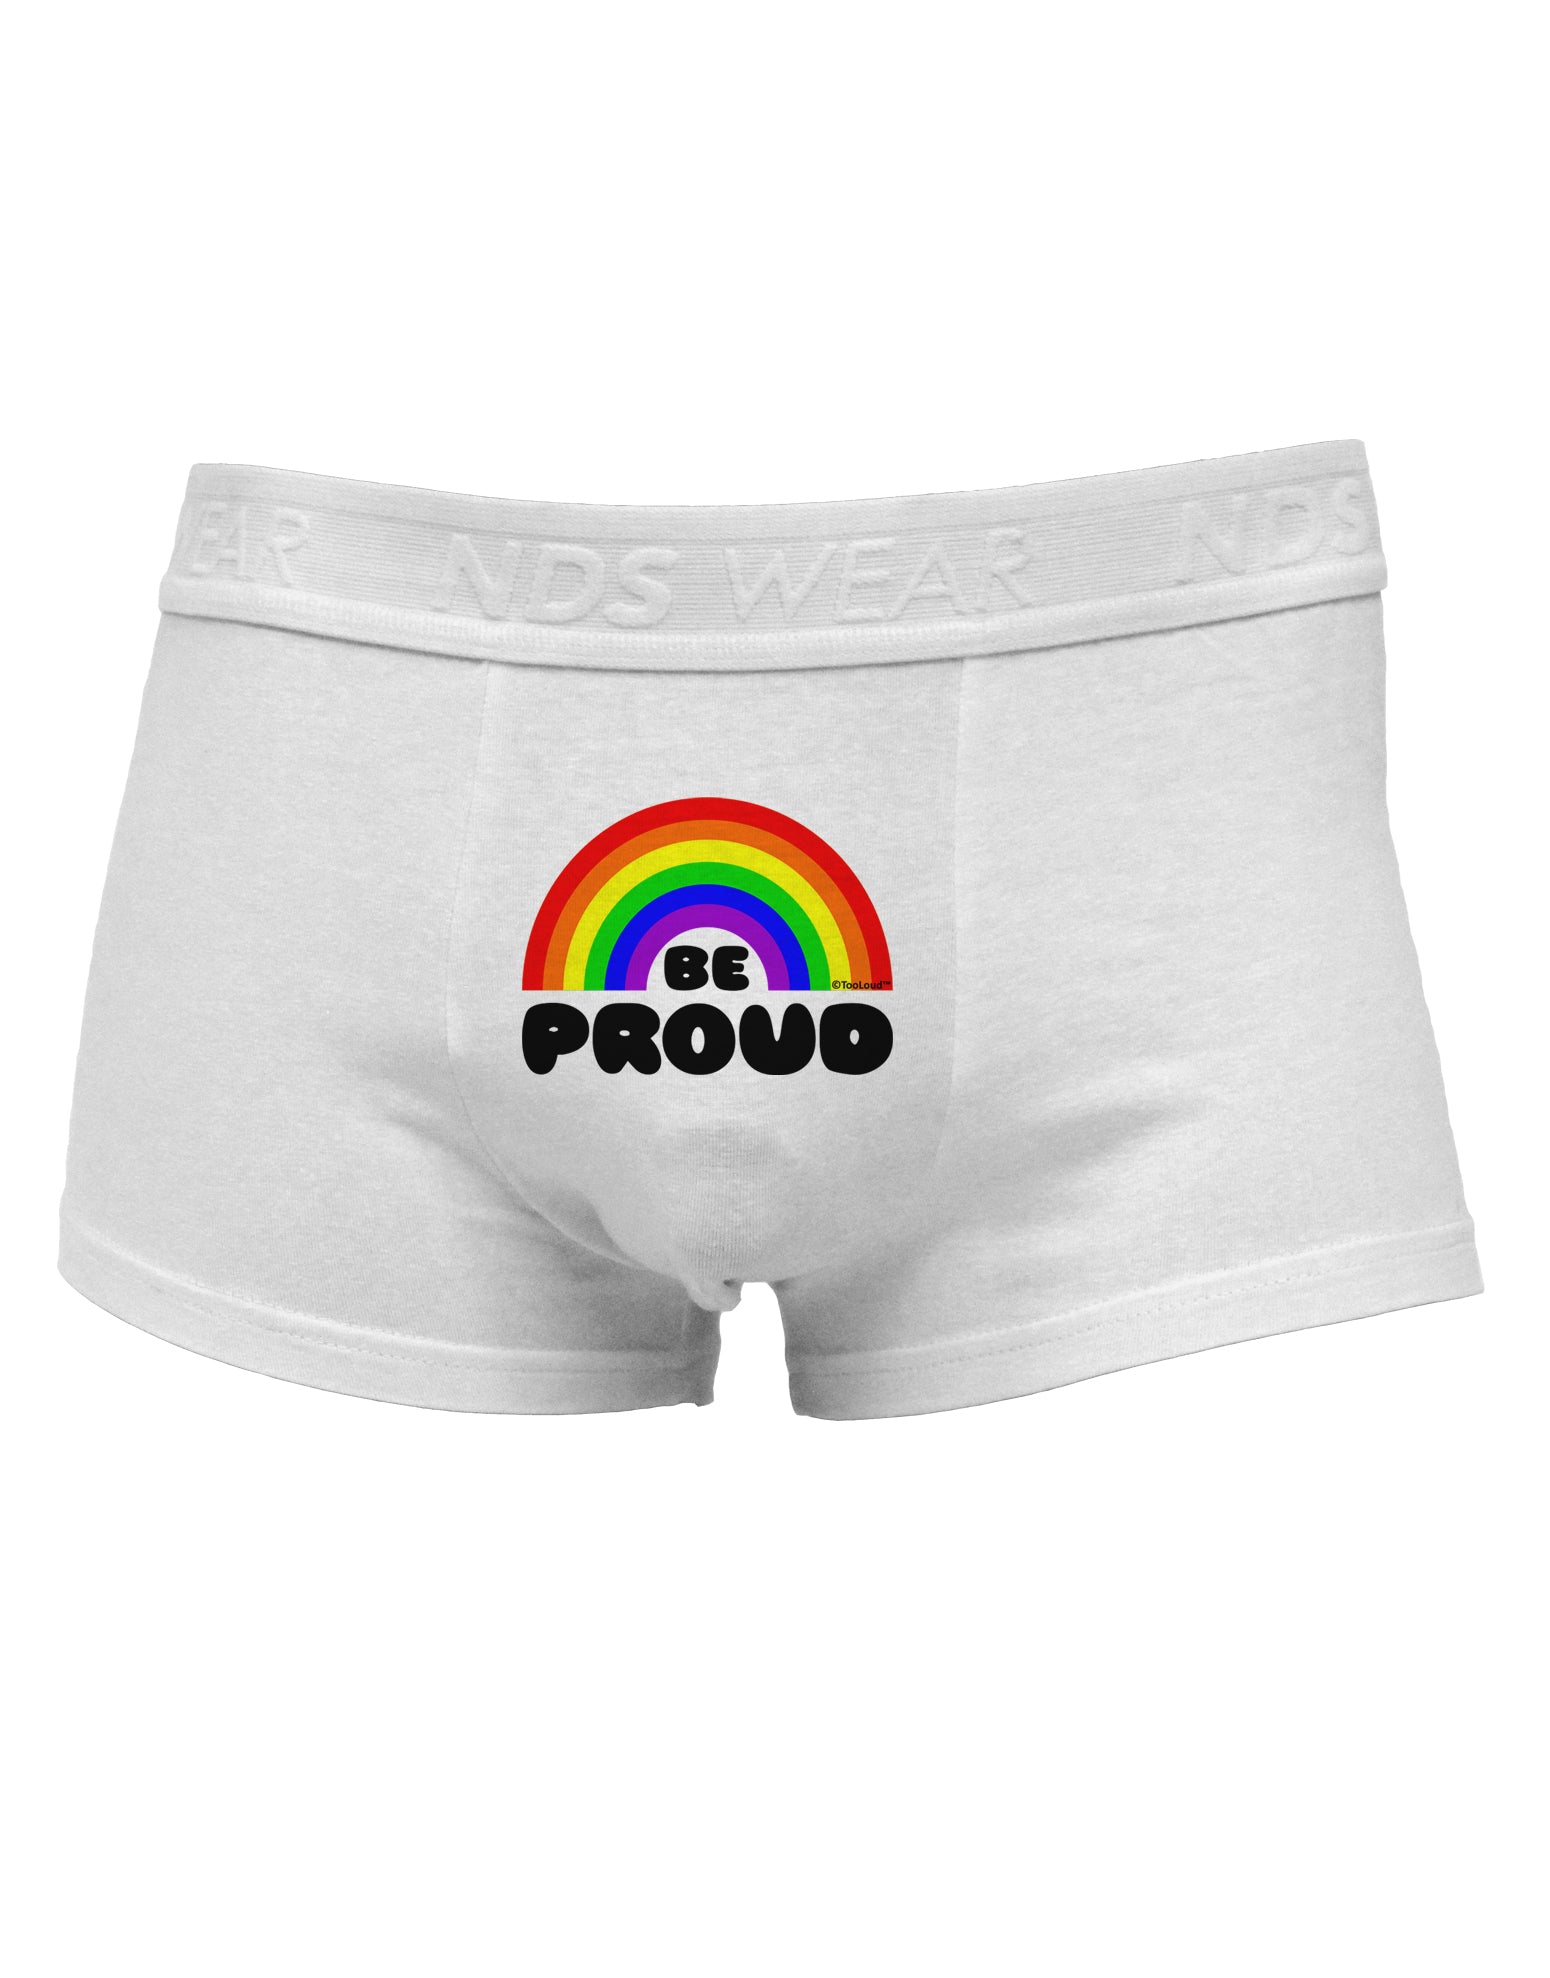 Premium Photo  Front view briefs of rainbow color on a white background  lgbt